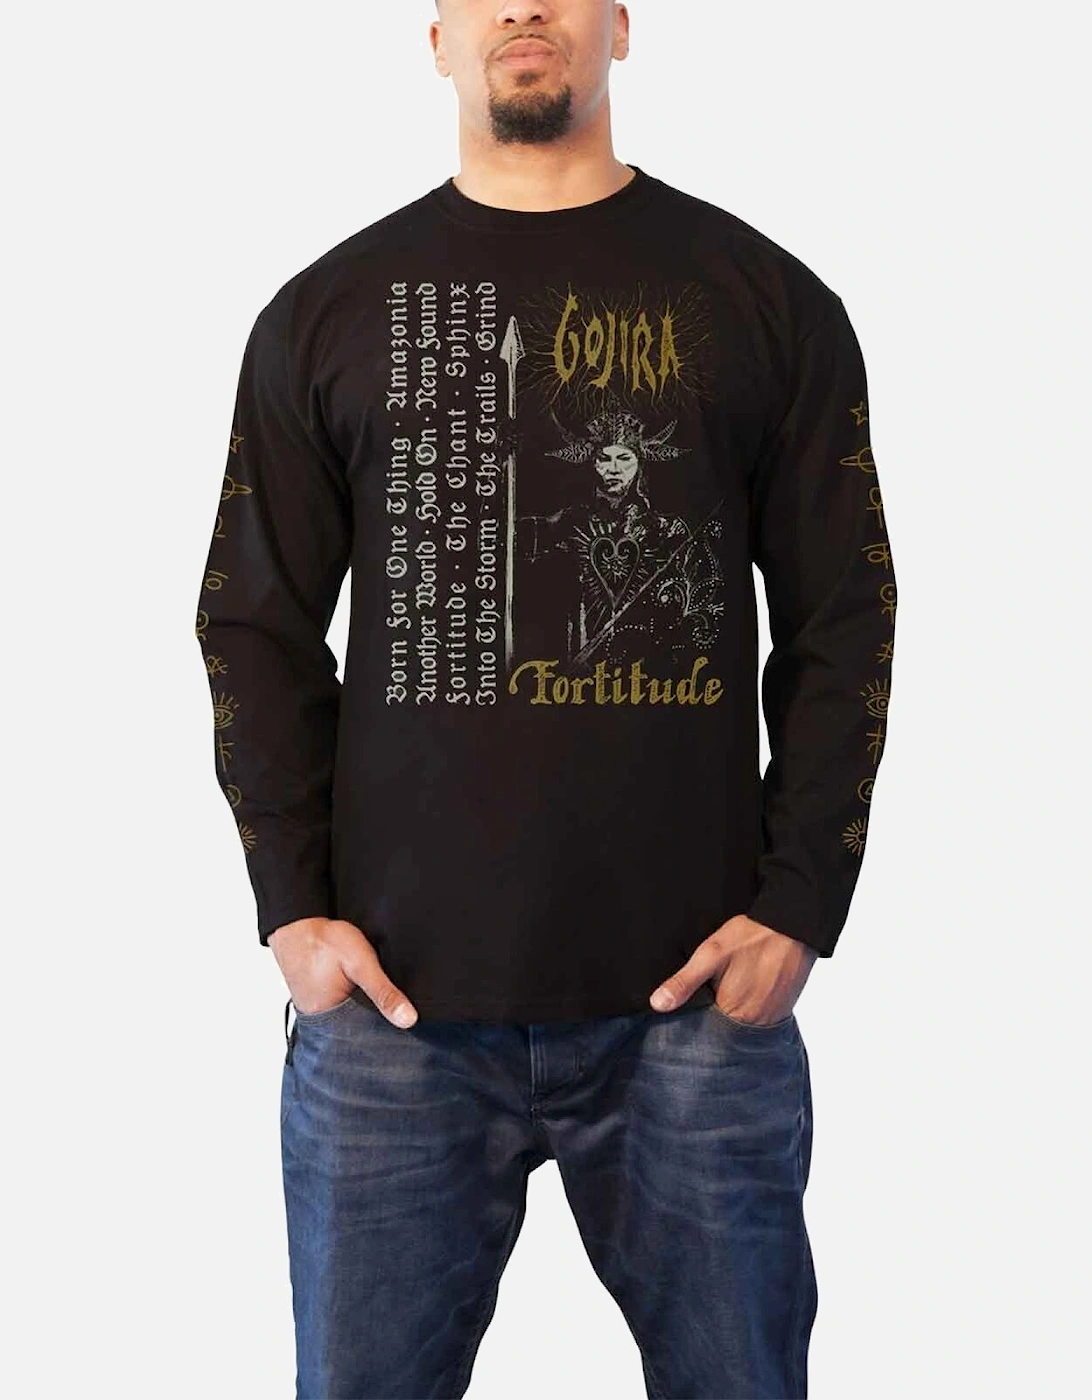 Unisex Adult Fortitude Track List Long-Sleeved T-Shirt